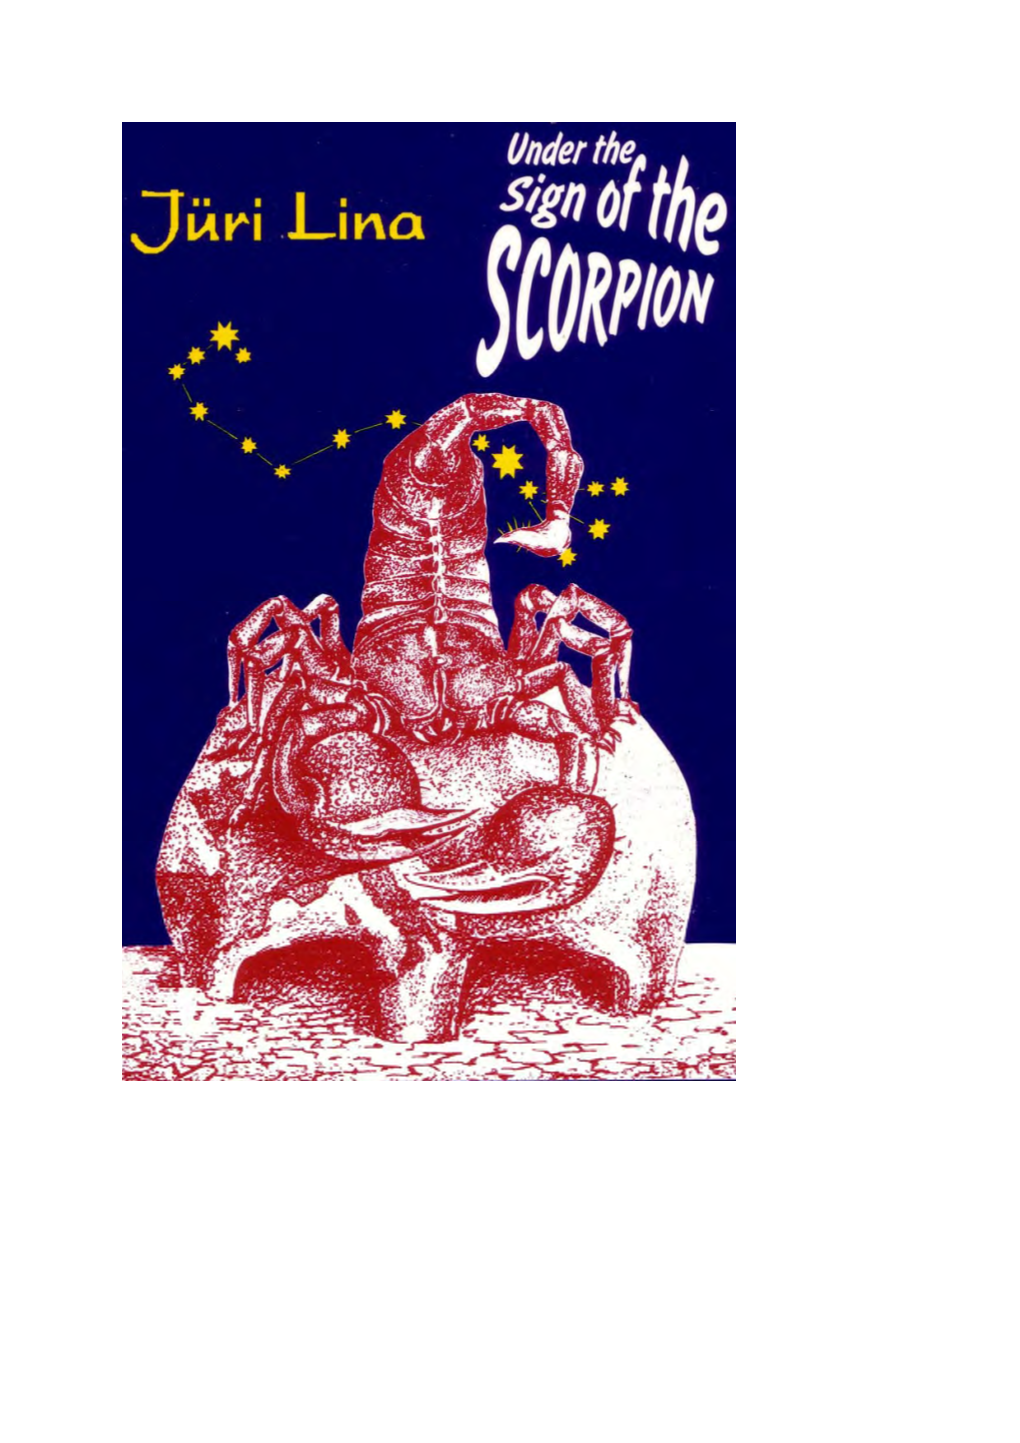 Under the Sign of the Scorpion", and Can Present an Enlarged Work to the Reader